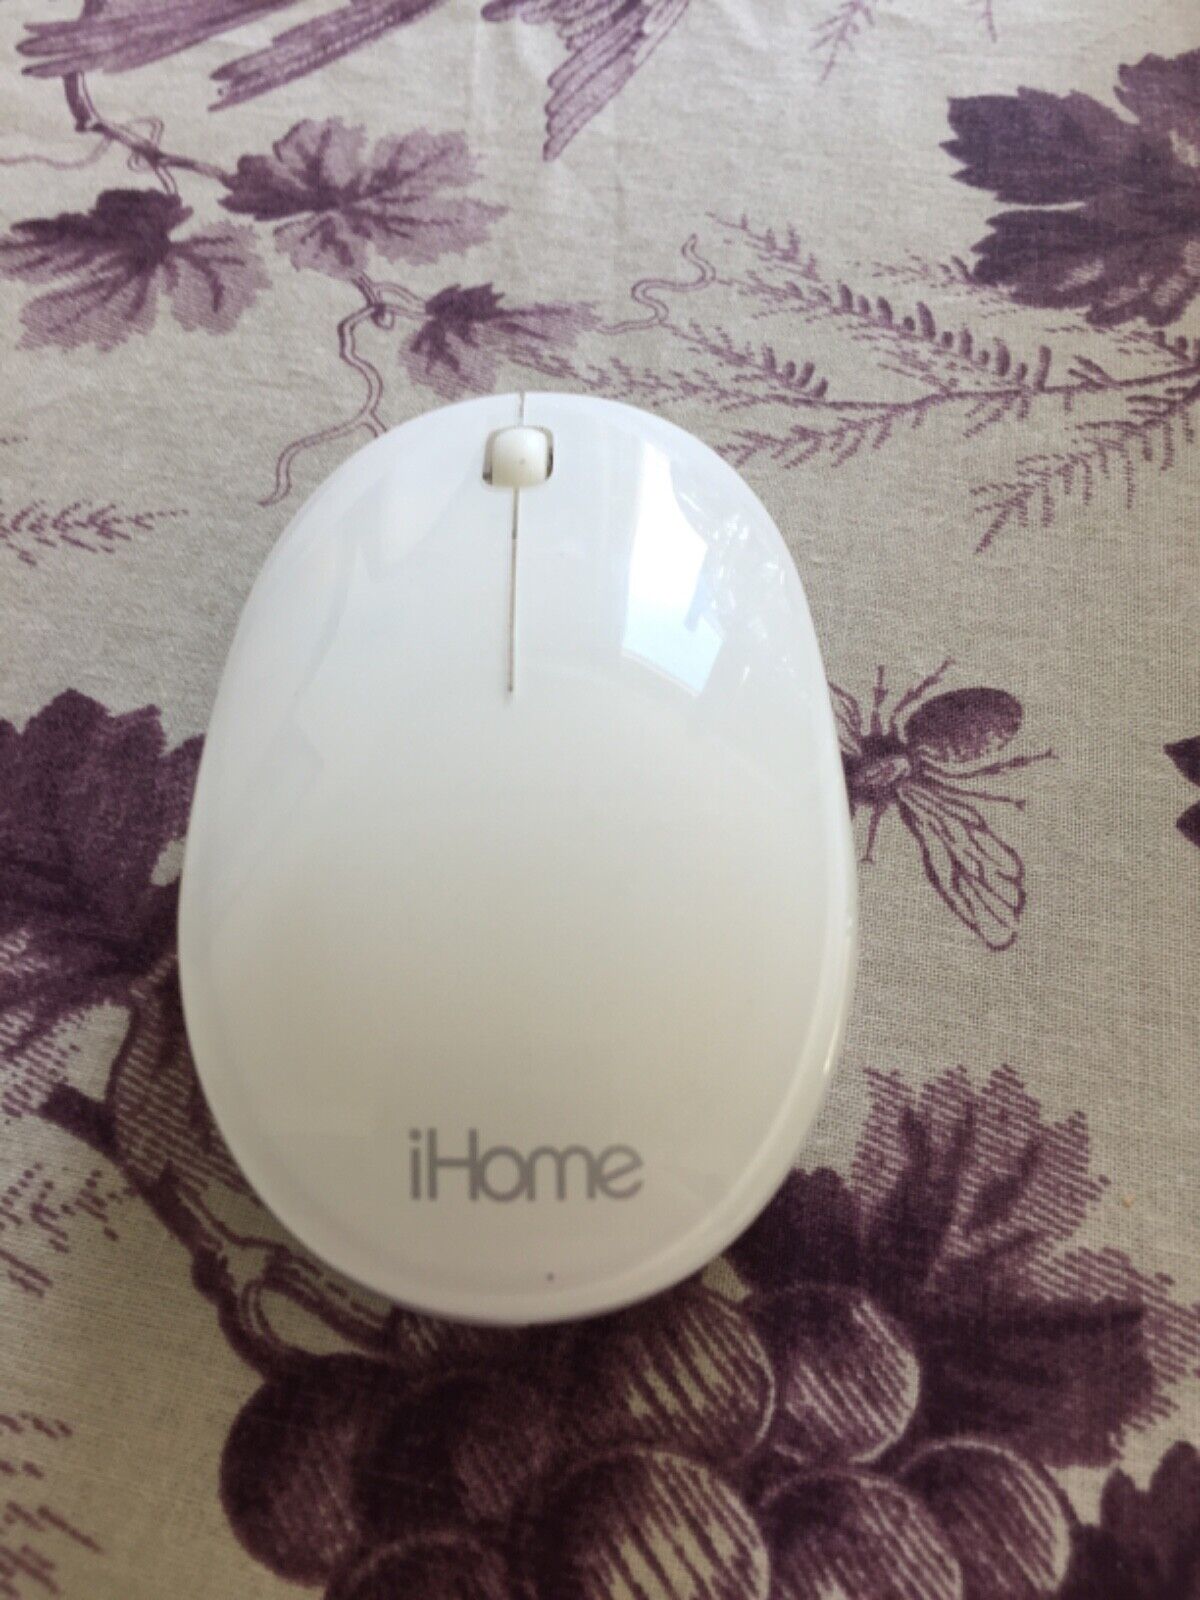 iHome WIRELESS OPTICAL MOUSE for MAC & PC gently used